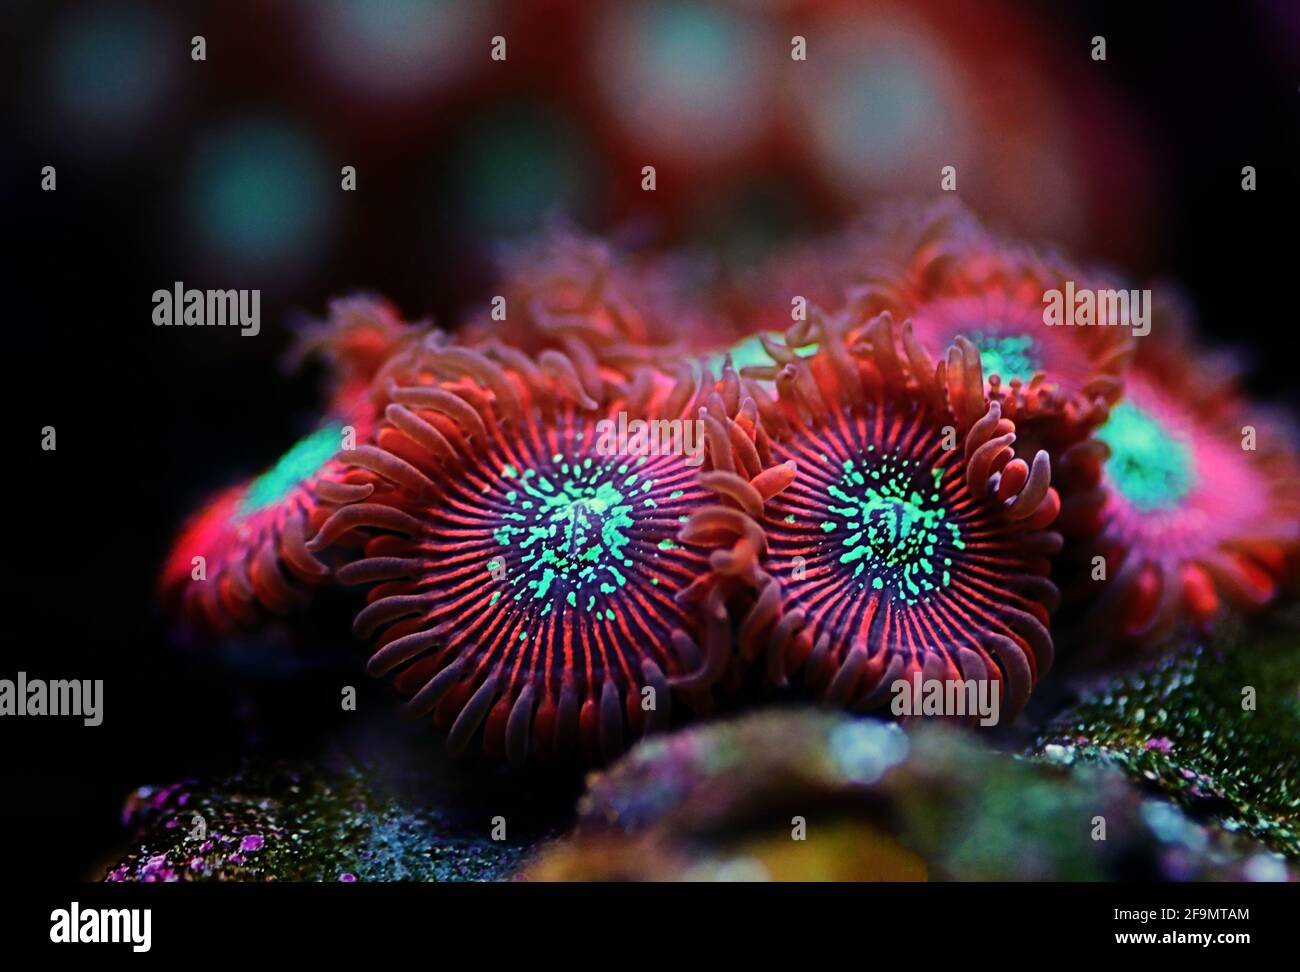 Red Magician expensive Caribbean zoanthus polyps in macro shot Stock Photo